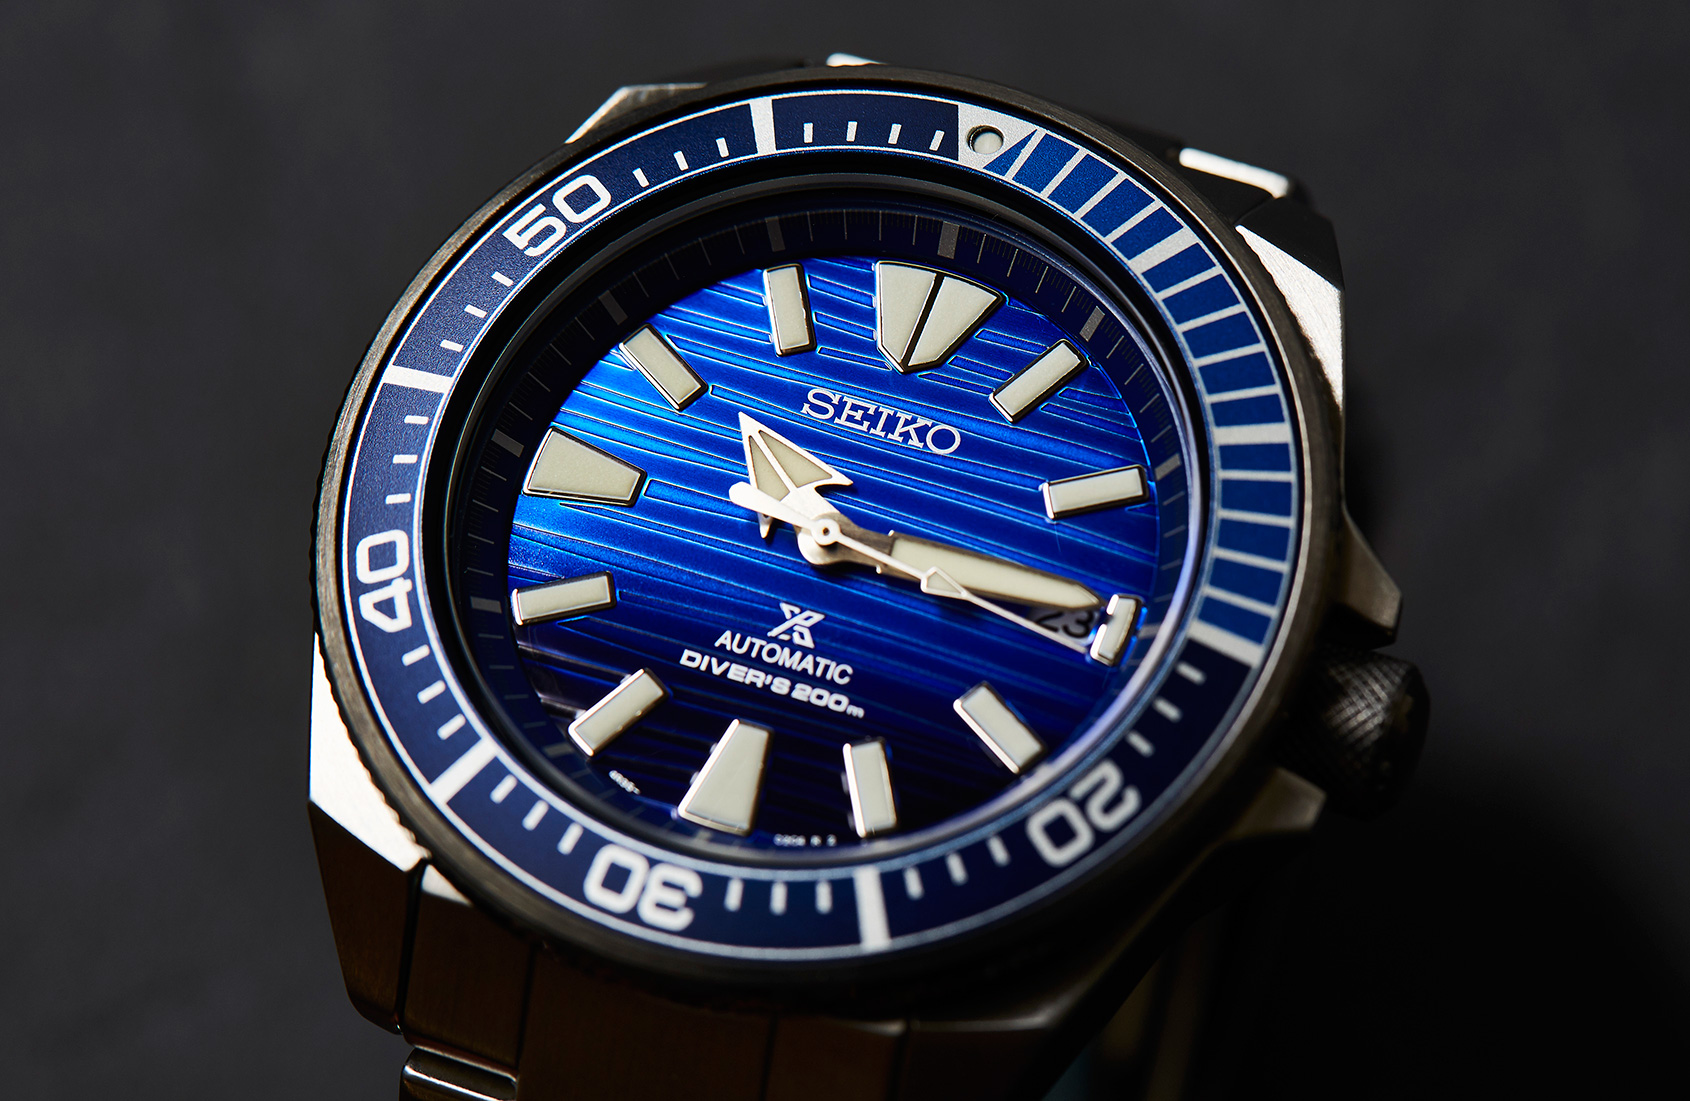 Seiko Samurai 'Save The Ocean' SRPC93K Review | peacecommission.kdsg.gov.ng